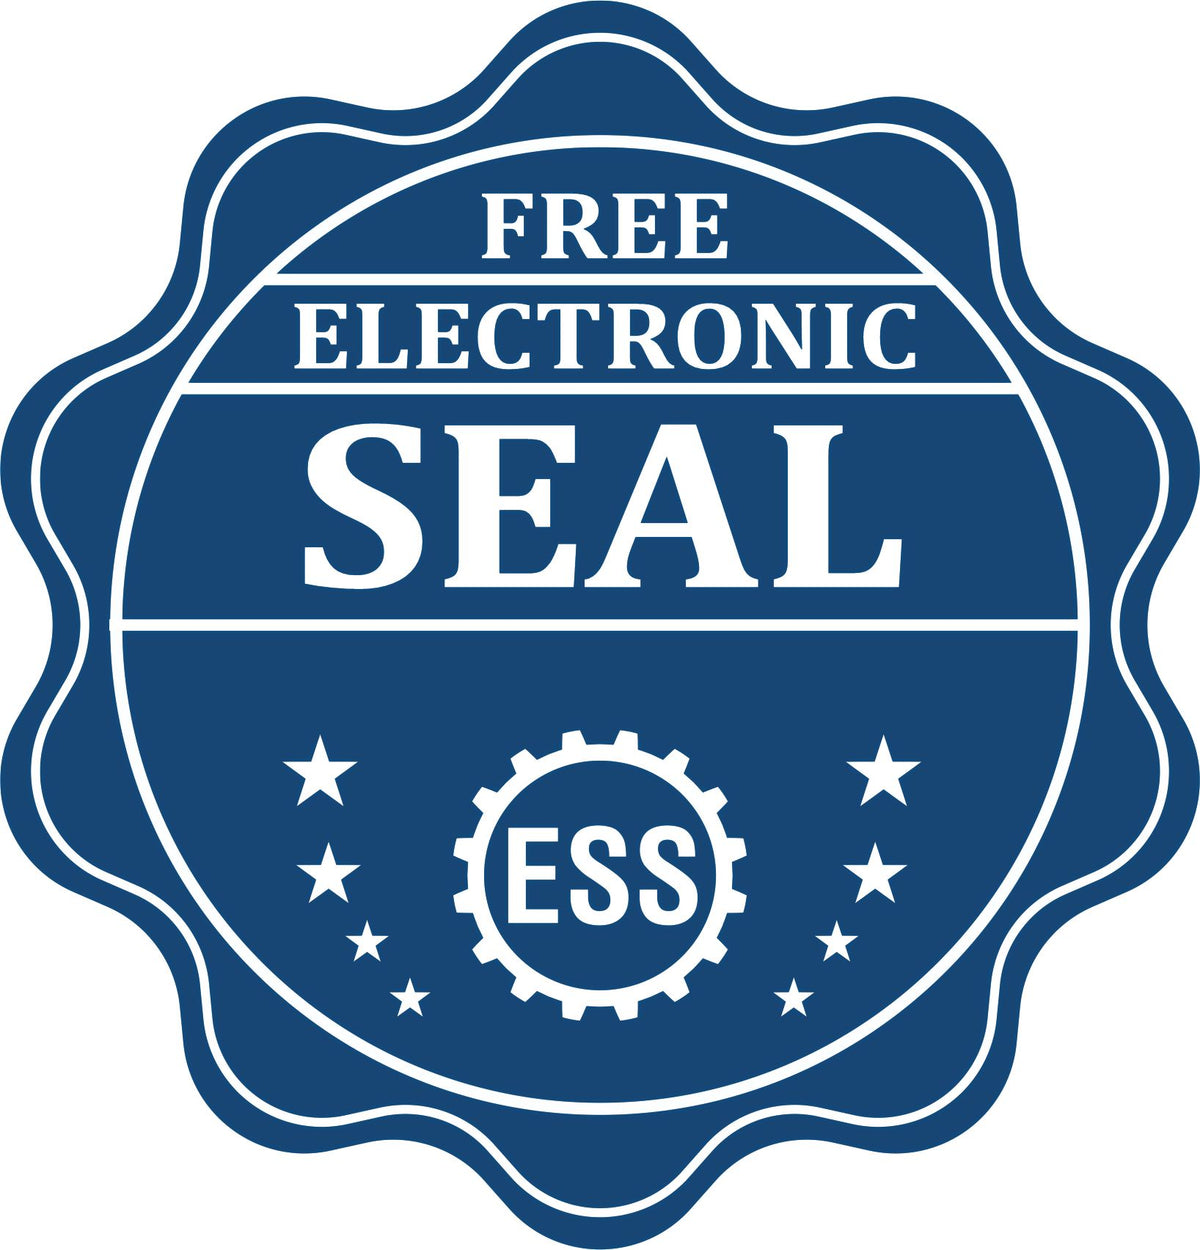 A badge showing a free electronic seal for the Handheld Virginia Professional Geologist Embosser with stars and the ESS gear on the emblem.